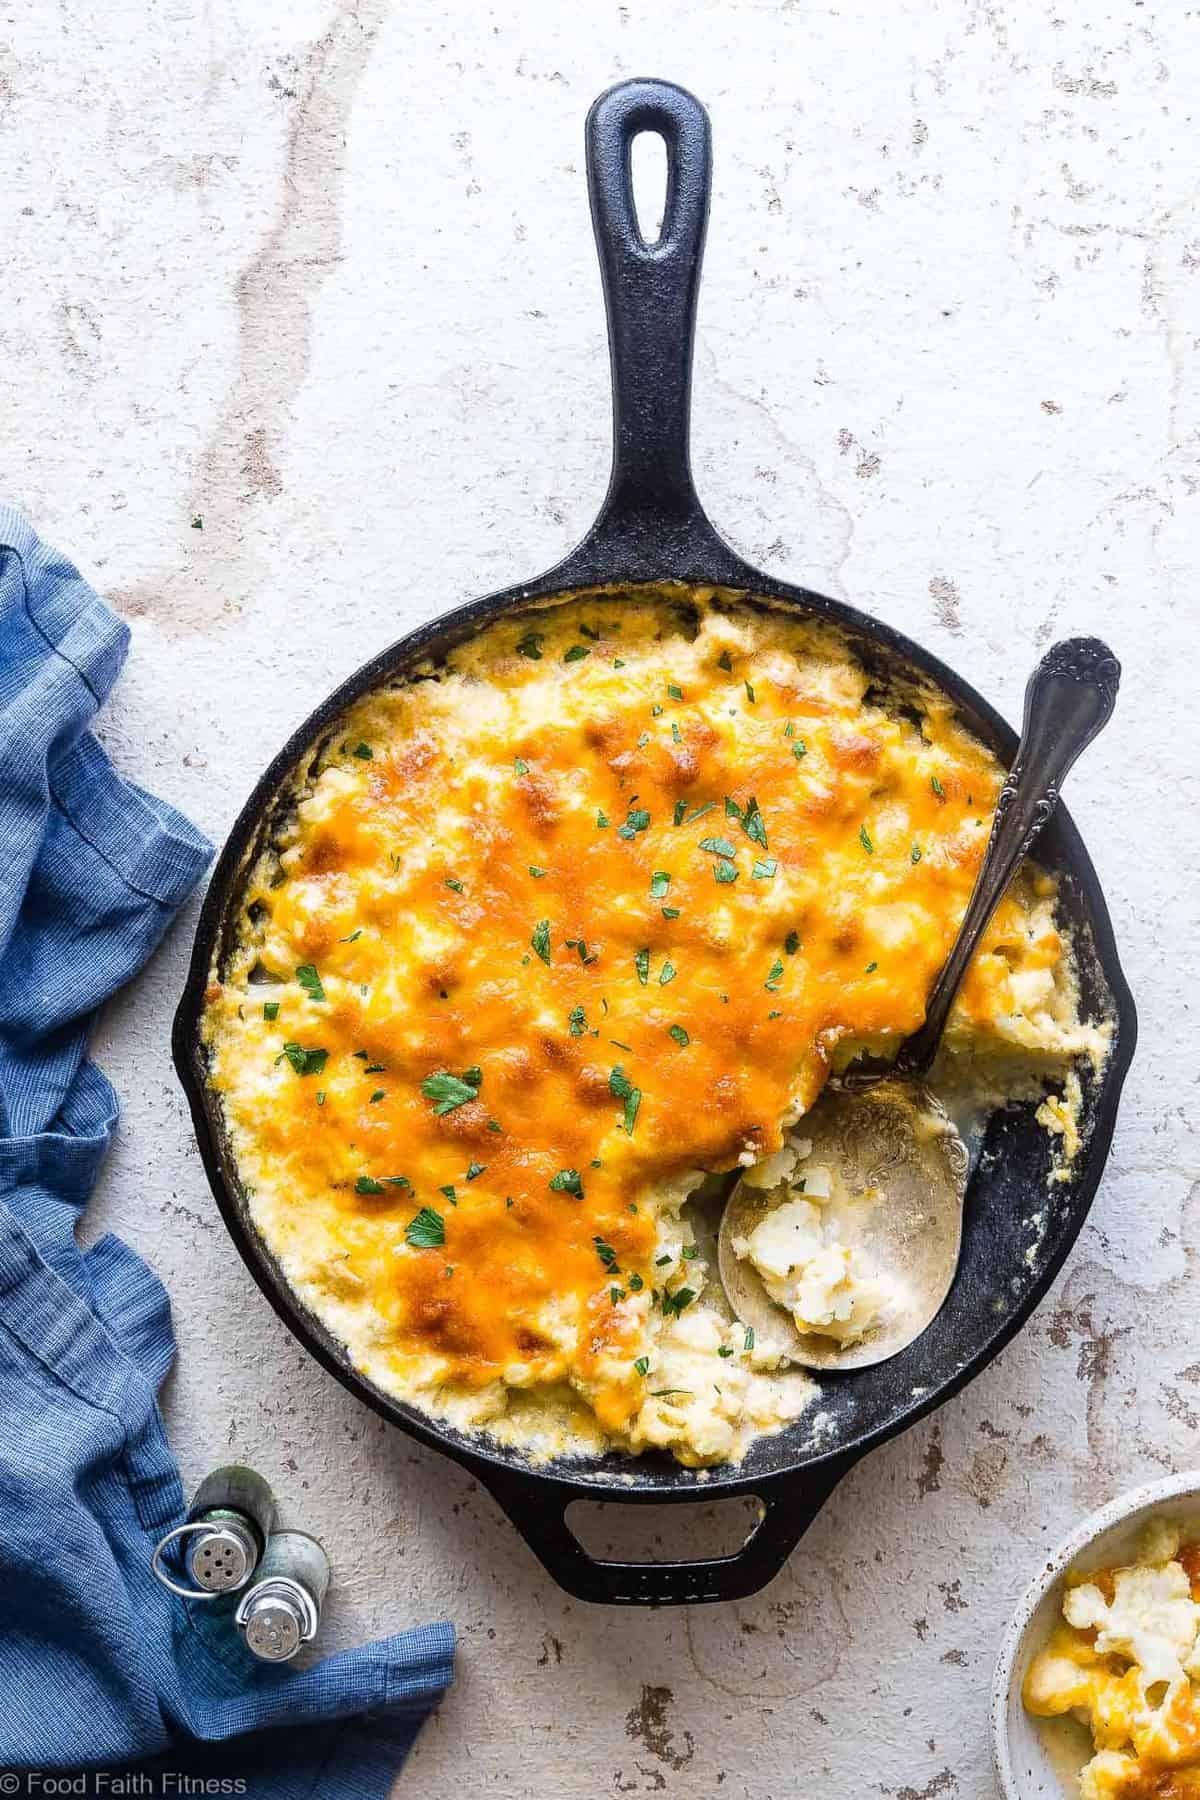 Keto Baked Cauliflower Au Gratin Recipe - This easy, healthy and keto friendly Low Carb Baked Cauliflower Au Gratin is a gluten free, delicious side dish that even the pickiest of eaters will love! Only 6 ingredients and SO cheesy! | #Foodfaithfitness | #Keto #lowcarb #Glutenfree #Healthy #Grainfree